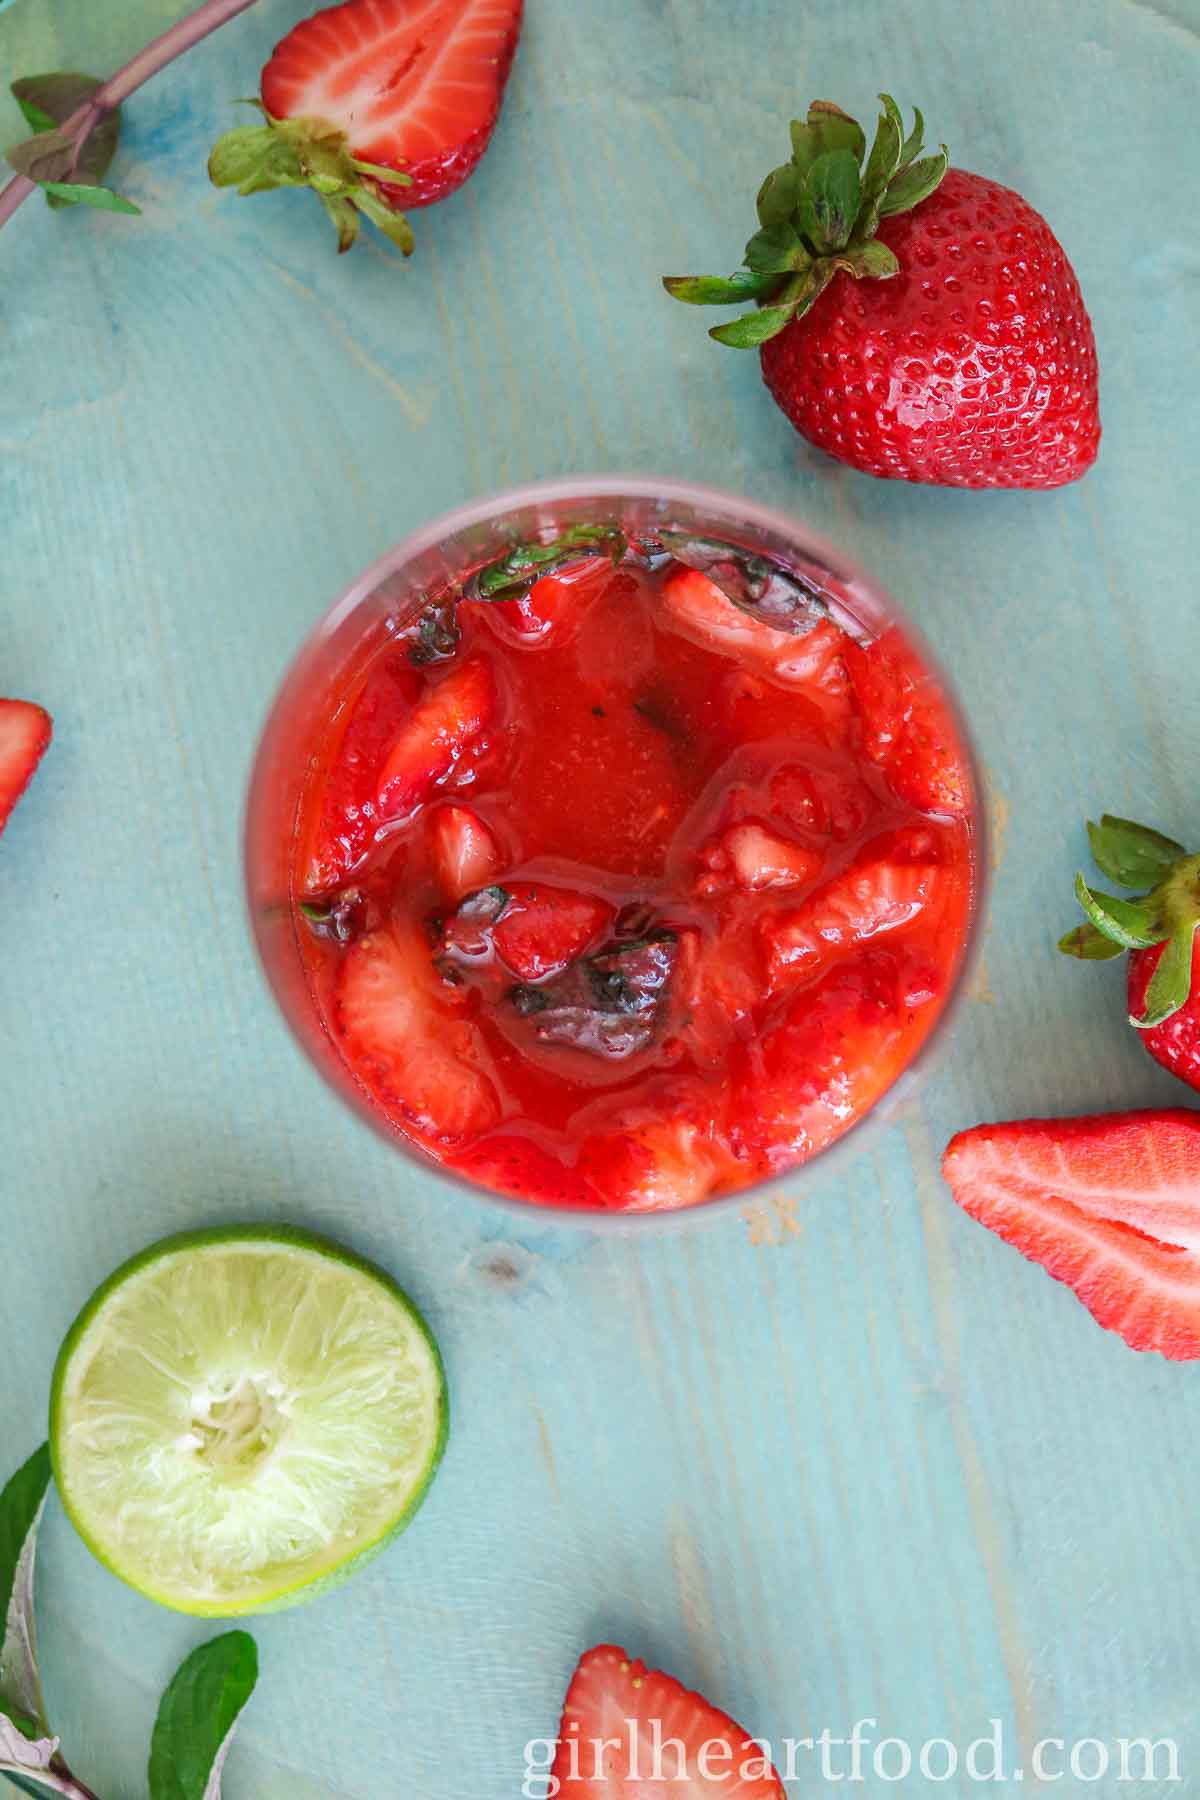 Muddled strawberries and mint in a glass.